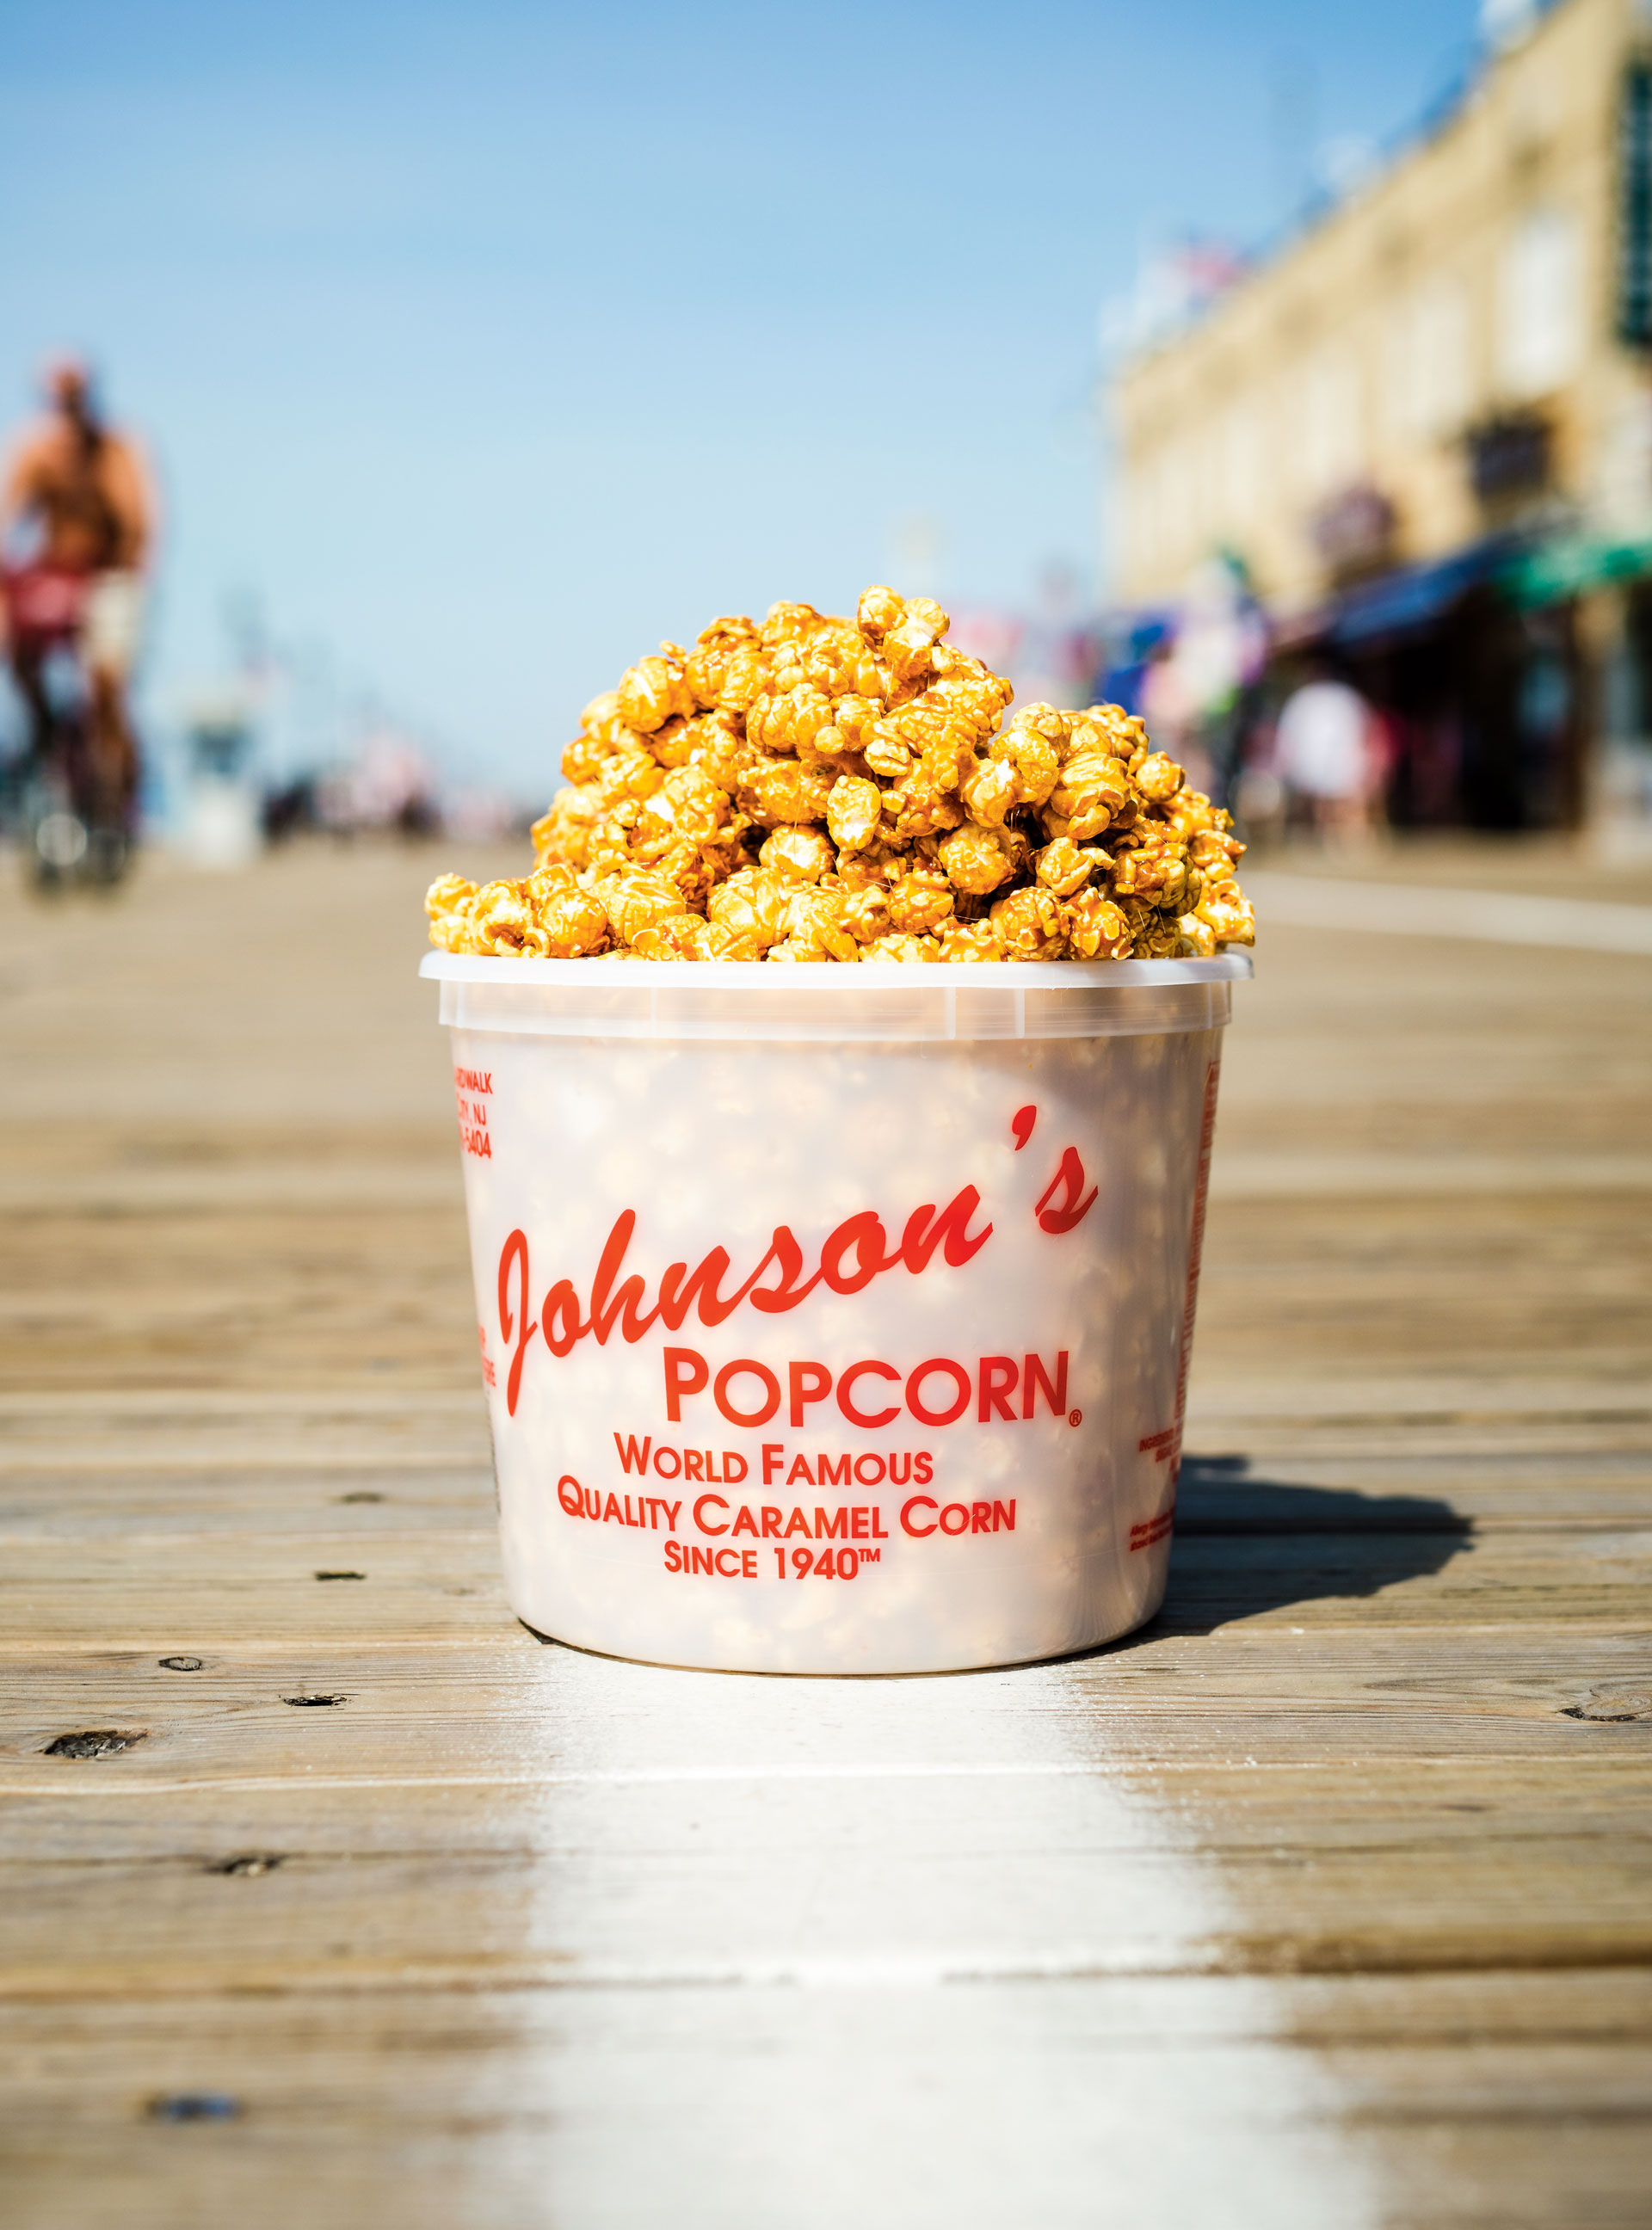 Spicy Caramel Corn with Peanuts